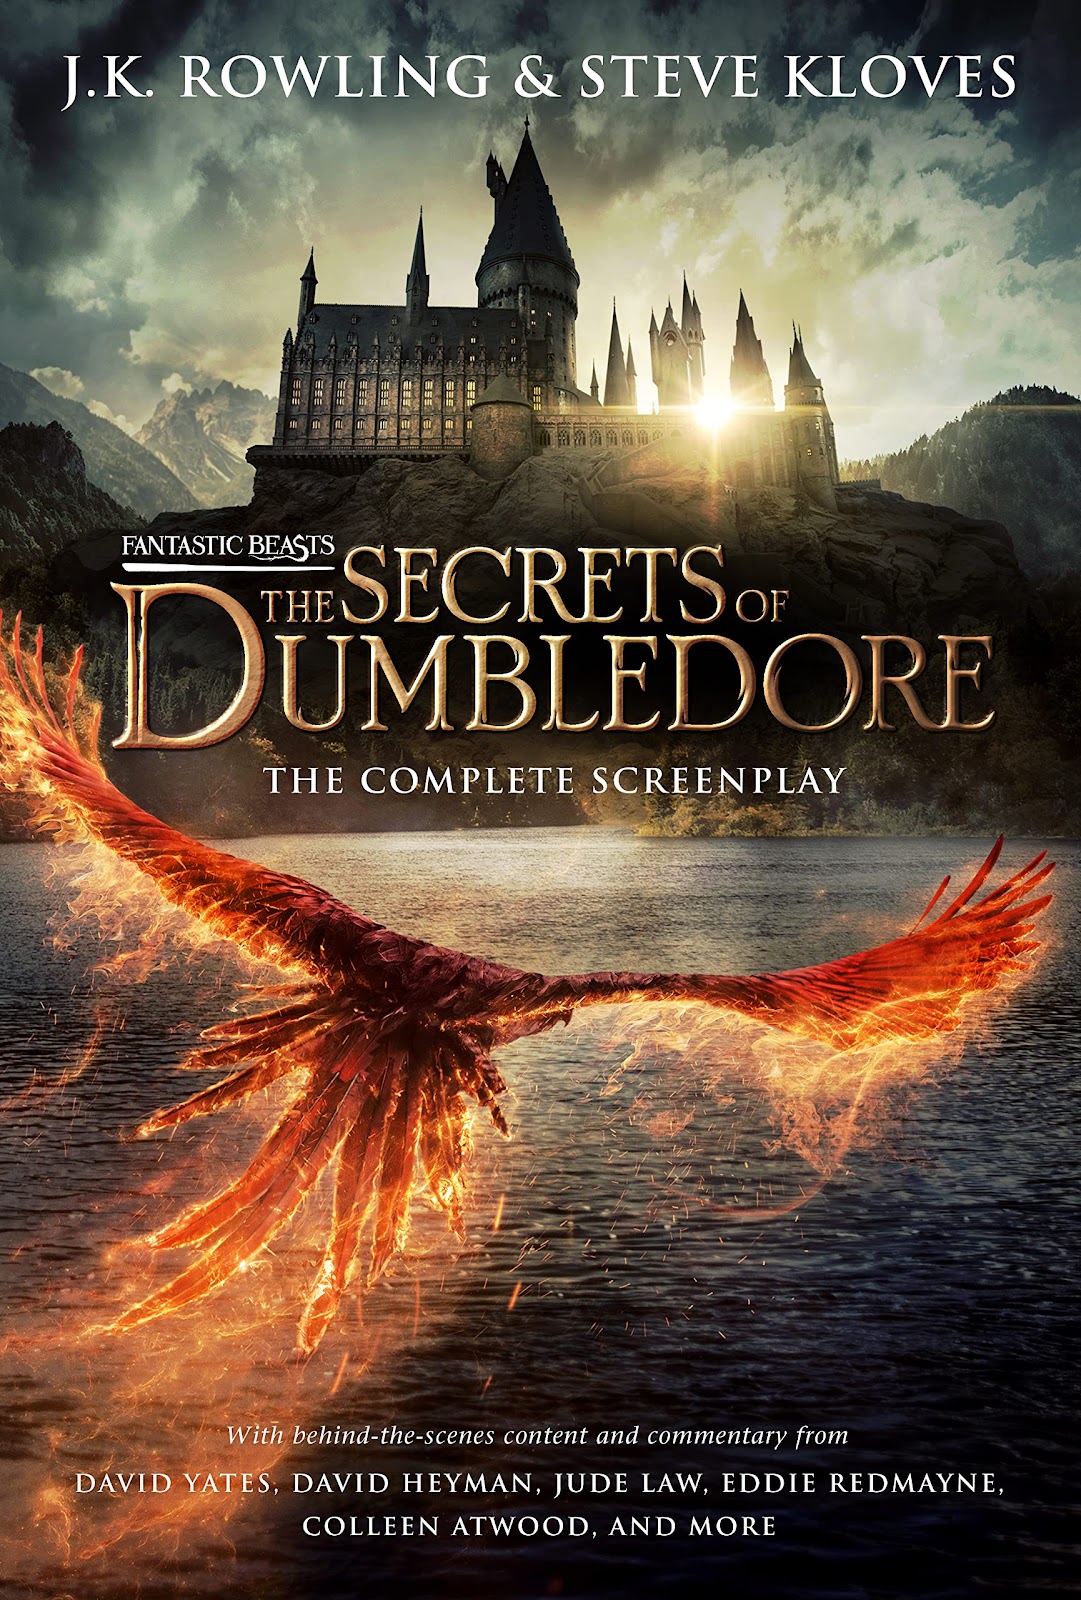 Fantastic Beasts: The Secrets of Dumbledore - The Complete Screenplay by J.K. Rowling and Steve Kloves